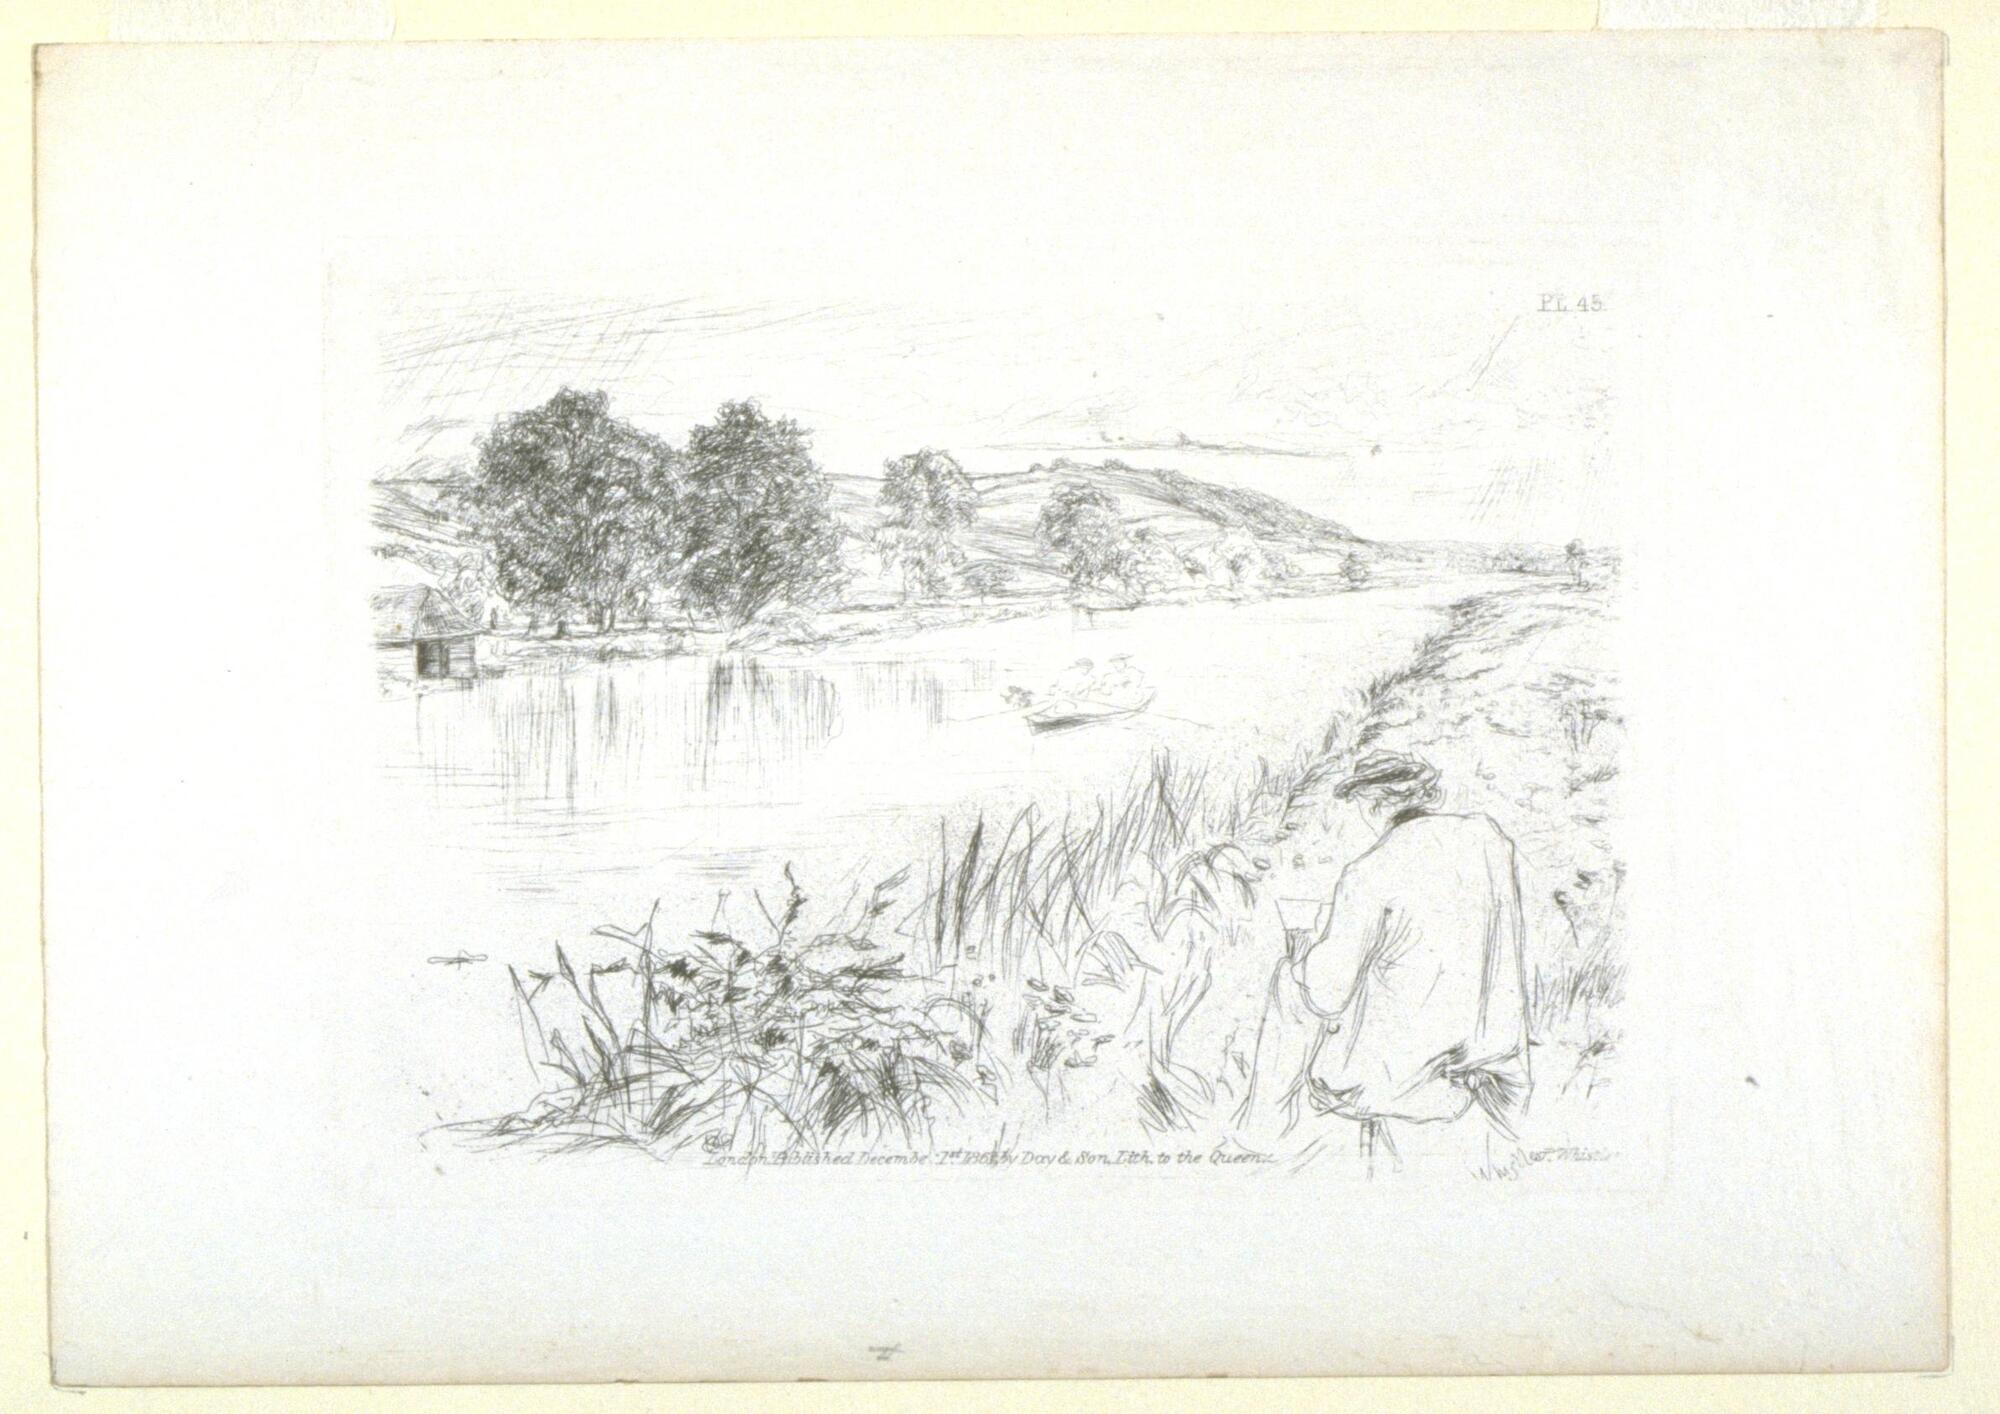 A rural countryside with a river flowing into the distance at the right dominates the scene. Two figures in a rowboat are at the center of the image and at the lower right corner, an artist, seated on a camp stool and facing away from the viewer, sketches the rowers.